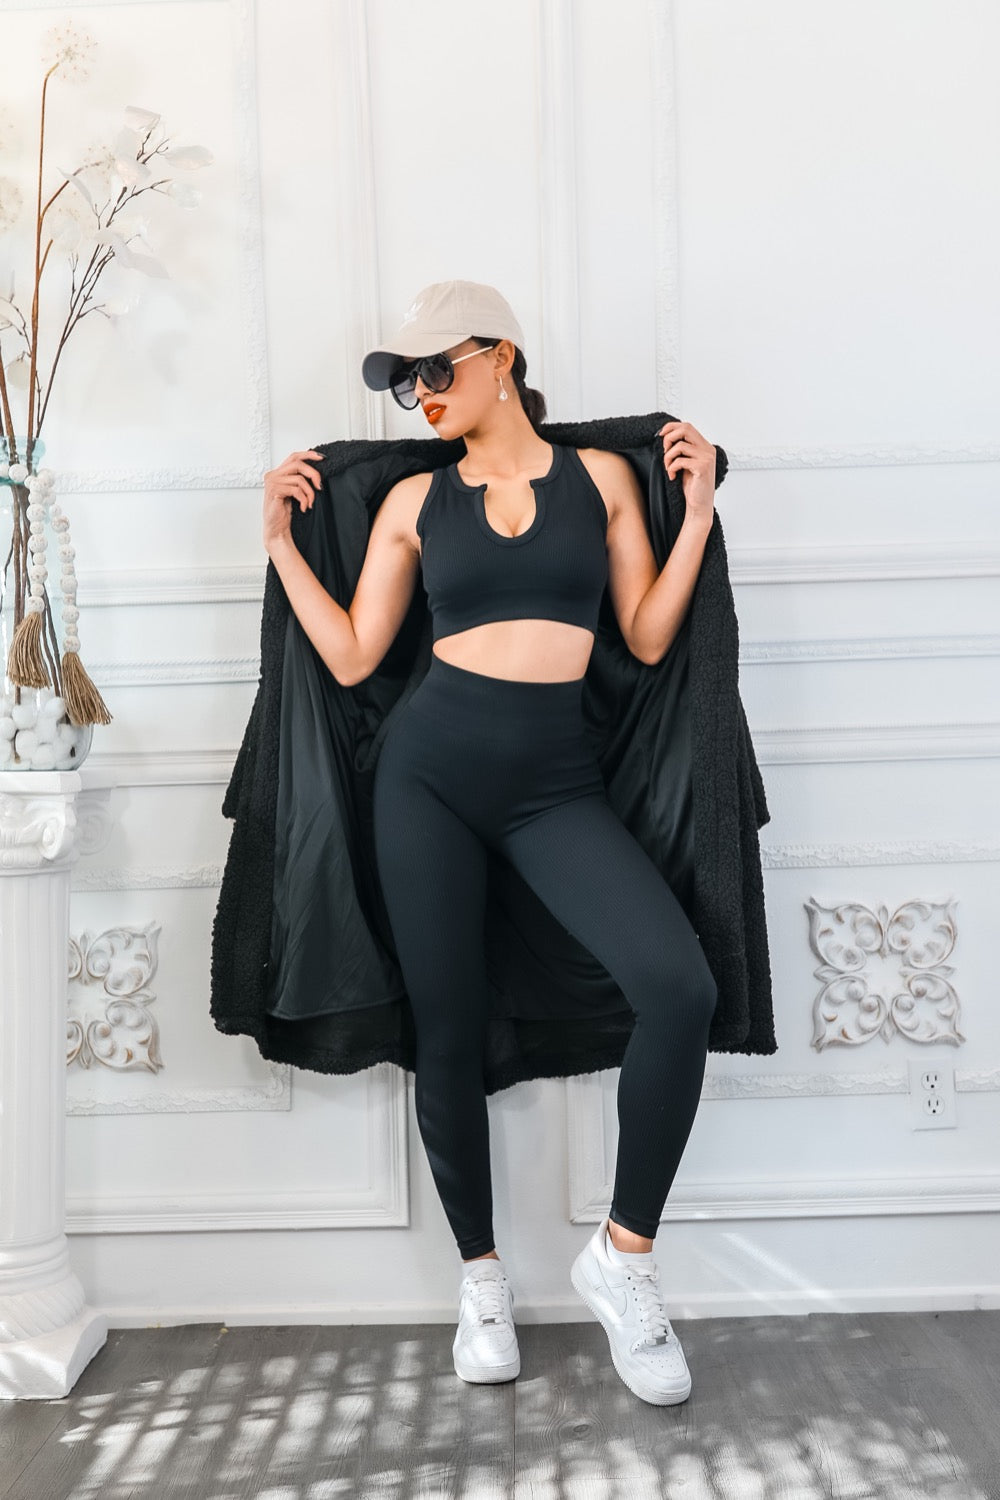 Next Level Ribbed Snatched Active Wear Pant Set